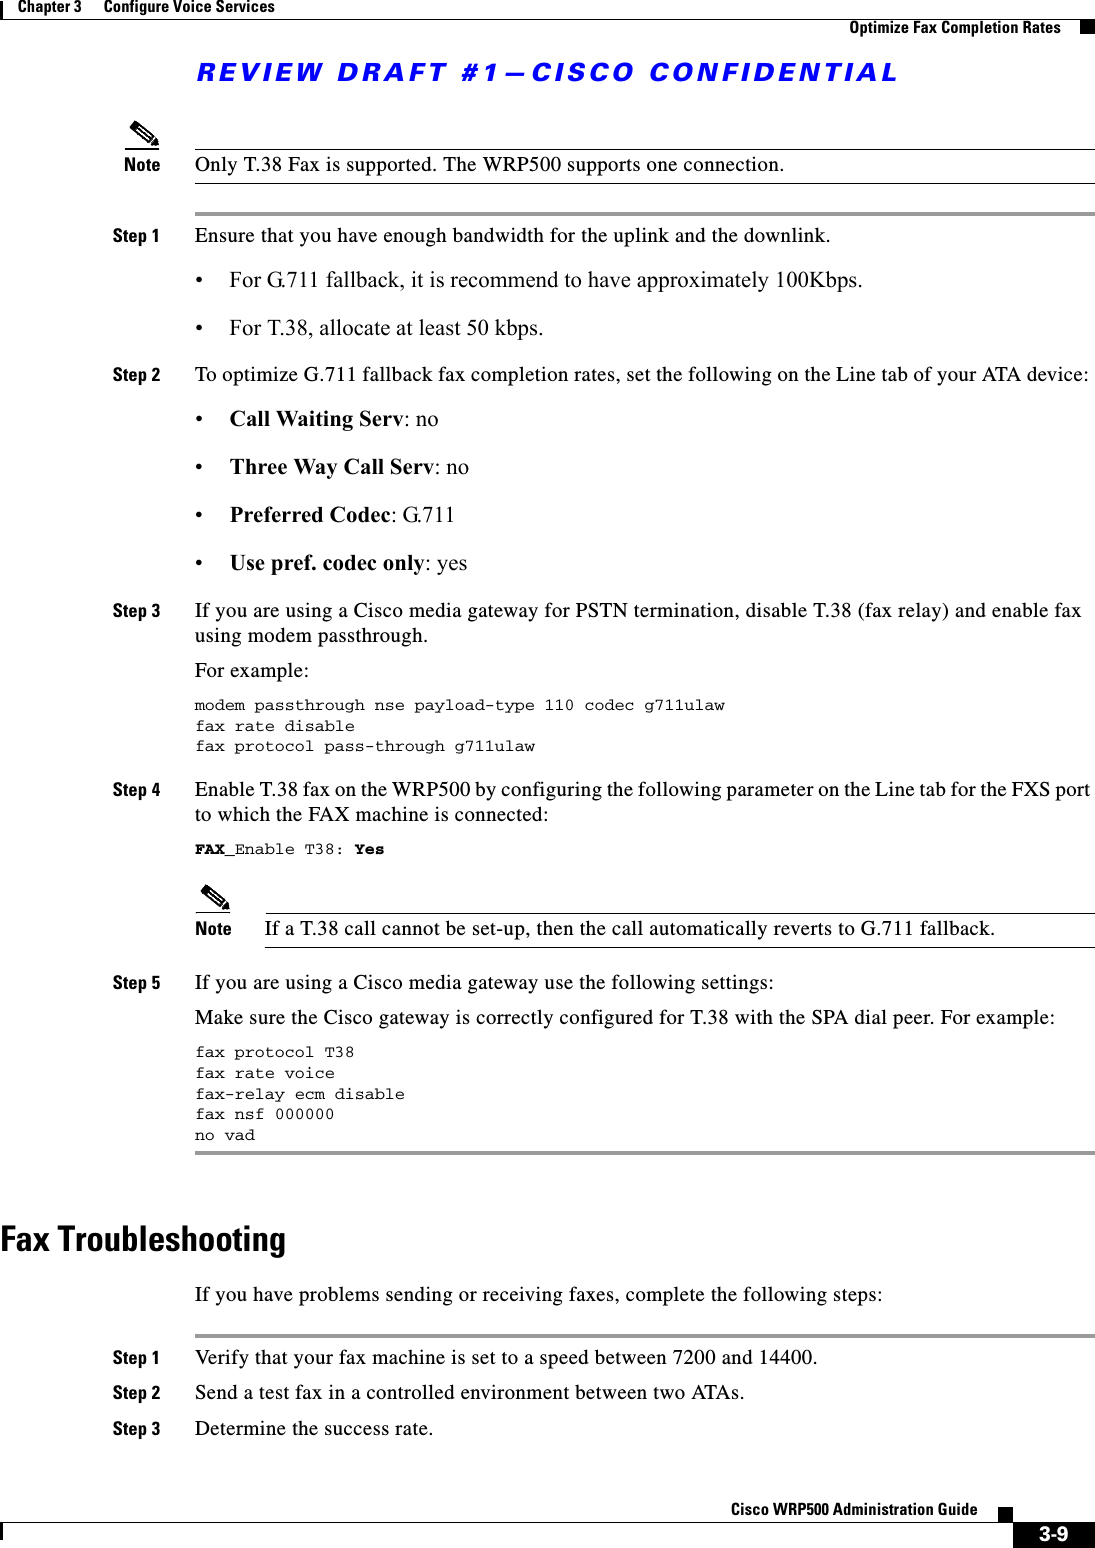 REVIEW DRAFT #1—CISCO CONFIDENTIAL3-9Cisco WRP500 Administration Guide Chapter 3      Configure Voice Services  Optimize Fax Completion RatesNote Only T.38 Fax is supported. The WRP500 supports one connection. Step 1 Ensure that you have enough bandwidth for the uplink and the downlink. • For G.711 fallback, it is recommend to have approximately 100Kbps. • For T.38, allocate at least 50 kbps. Step 2 To optimize G.711 fallback fax completion rates, set the following on the Line tab of your ATA device: •Call Waiting Serv: no •Three Way Call Serv: no •Preferred Codec: G.711 •Use pref. codec only: yesStep 3 If you are using a Cisco media gateway for PSTN termination, disable T.38 (fax relay) and enable fax using modem passthrough. For example:modem passthrough nse payload-type 110 codec g711ulawfax rate disablefax protocol pass-through g711ulawStep 4 Enable T.38 fax on the WRP500 by configuring the following parameter on the Line tab for the FXS port to which the FAX machine is connected:FAX_Enable T38: YesNote If a T.38 call cannot be set-up, then the call automatically reverts to G.711 fallback.Step 5 If you are using a Cisco media gateway use the following settings:Make sure the Cisco gateway is correctly configured for T.38 with the SPA dial peer. For example:fax protocol T38fax rate voicefax-relay ecm disablefax nsf 000000no vadFax TroubleshootingIf you have problems sending or receiving faxes, complete the following steps:Step 1 Verify that your fax machine is set to a speed between 7200 and 14400.Step 2 Send a test fax in a controlled environment between two ATAs.Step 3 Determine the success rate.